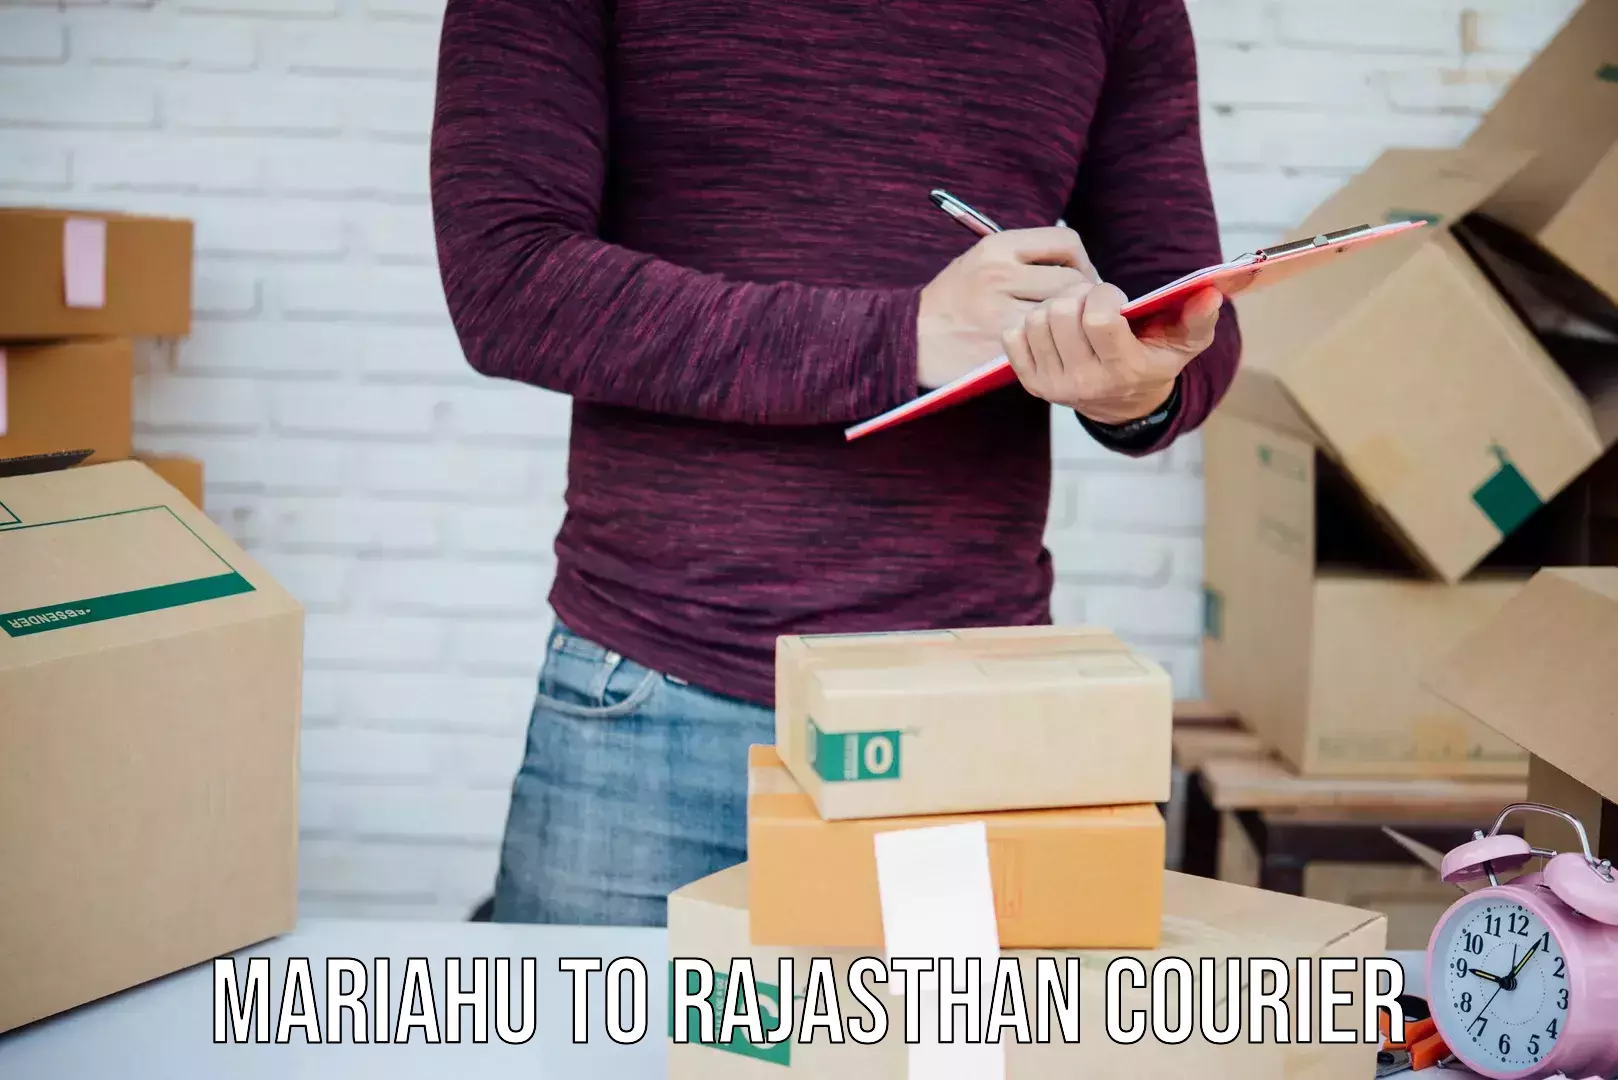 Custom courier packages Mariahu to Tibbi